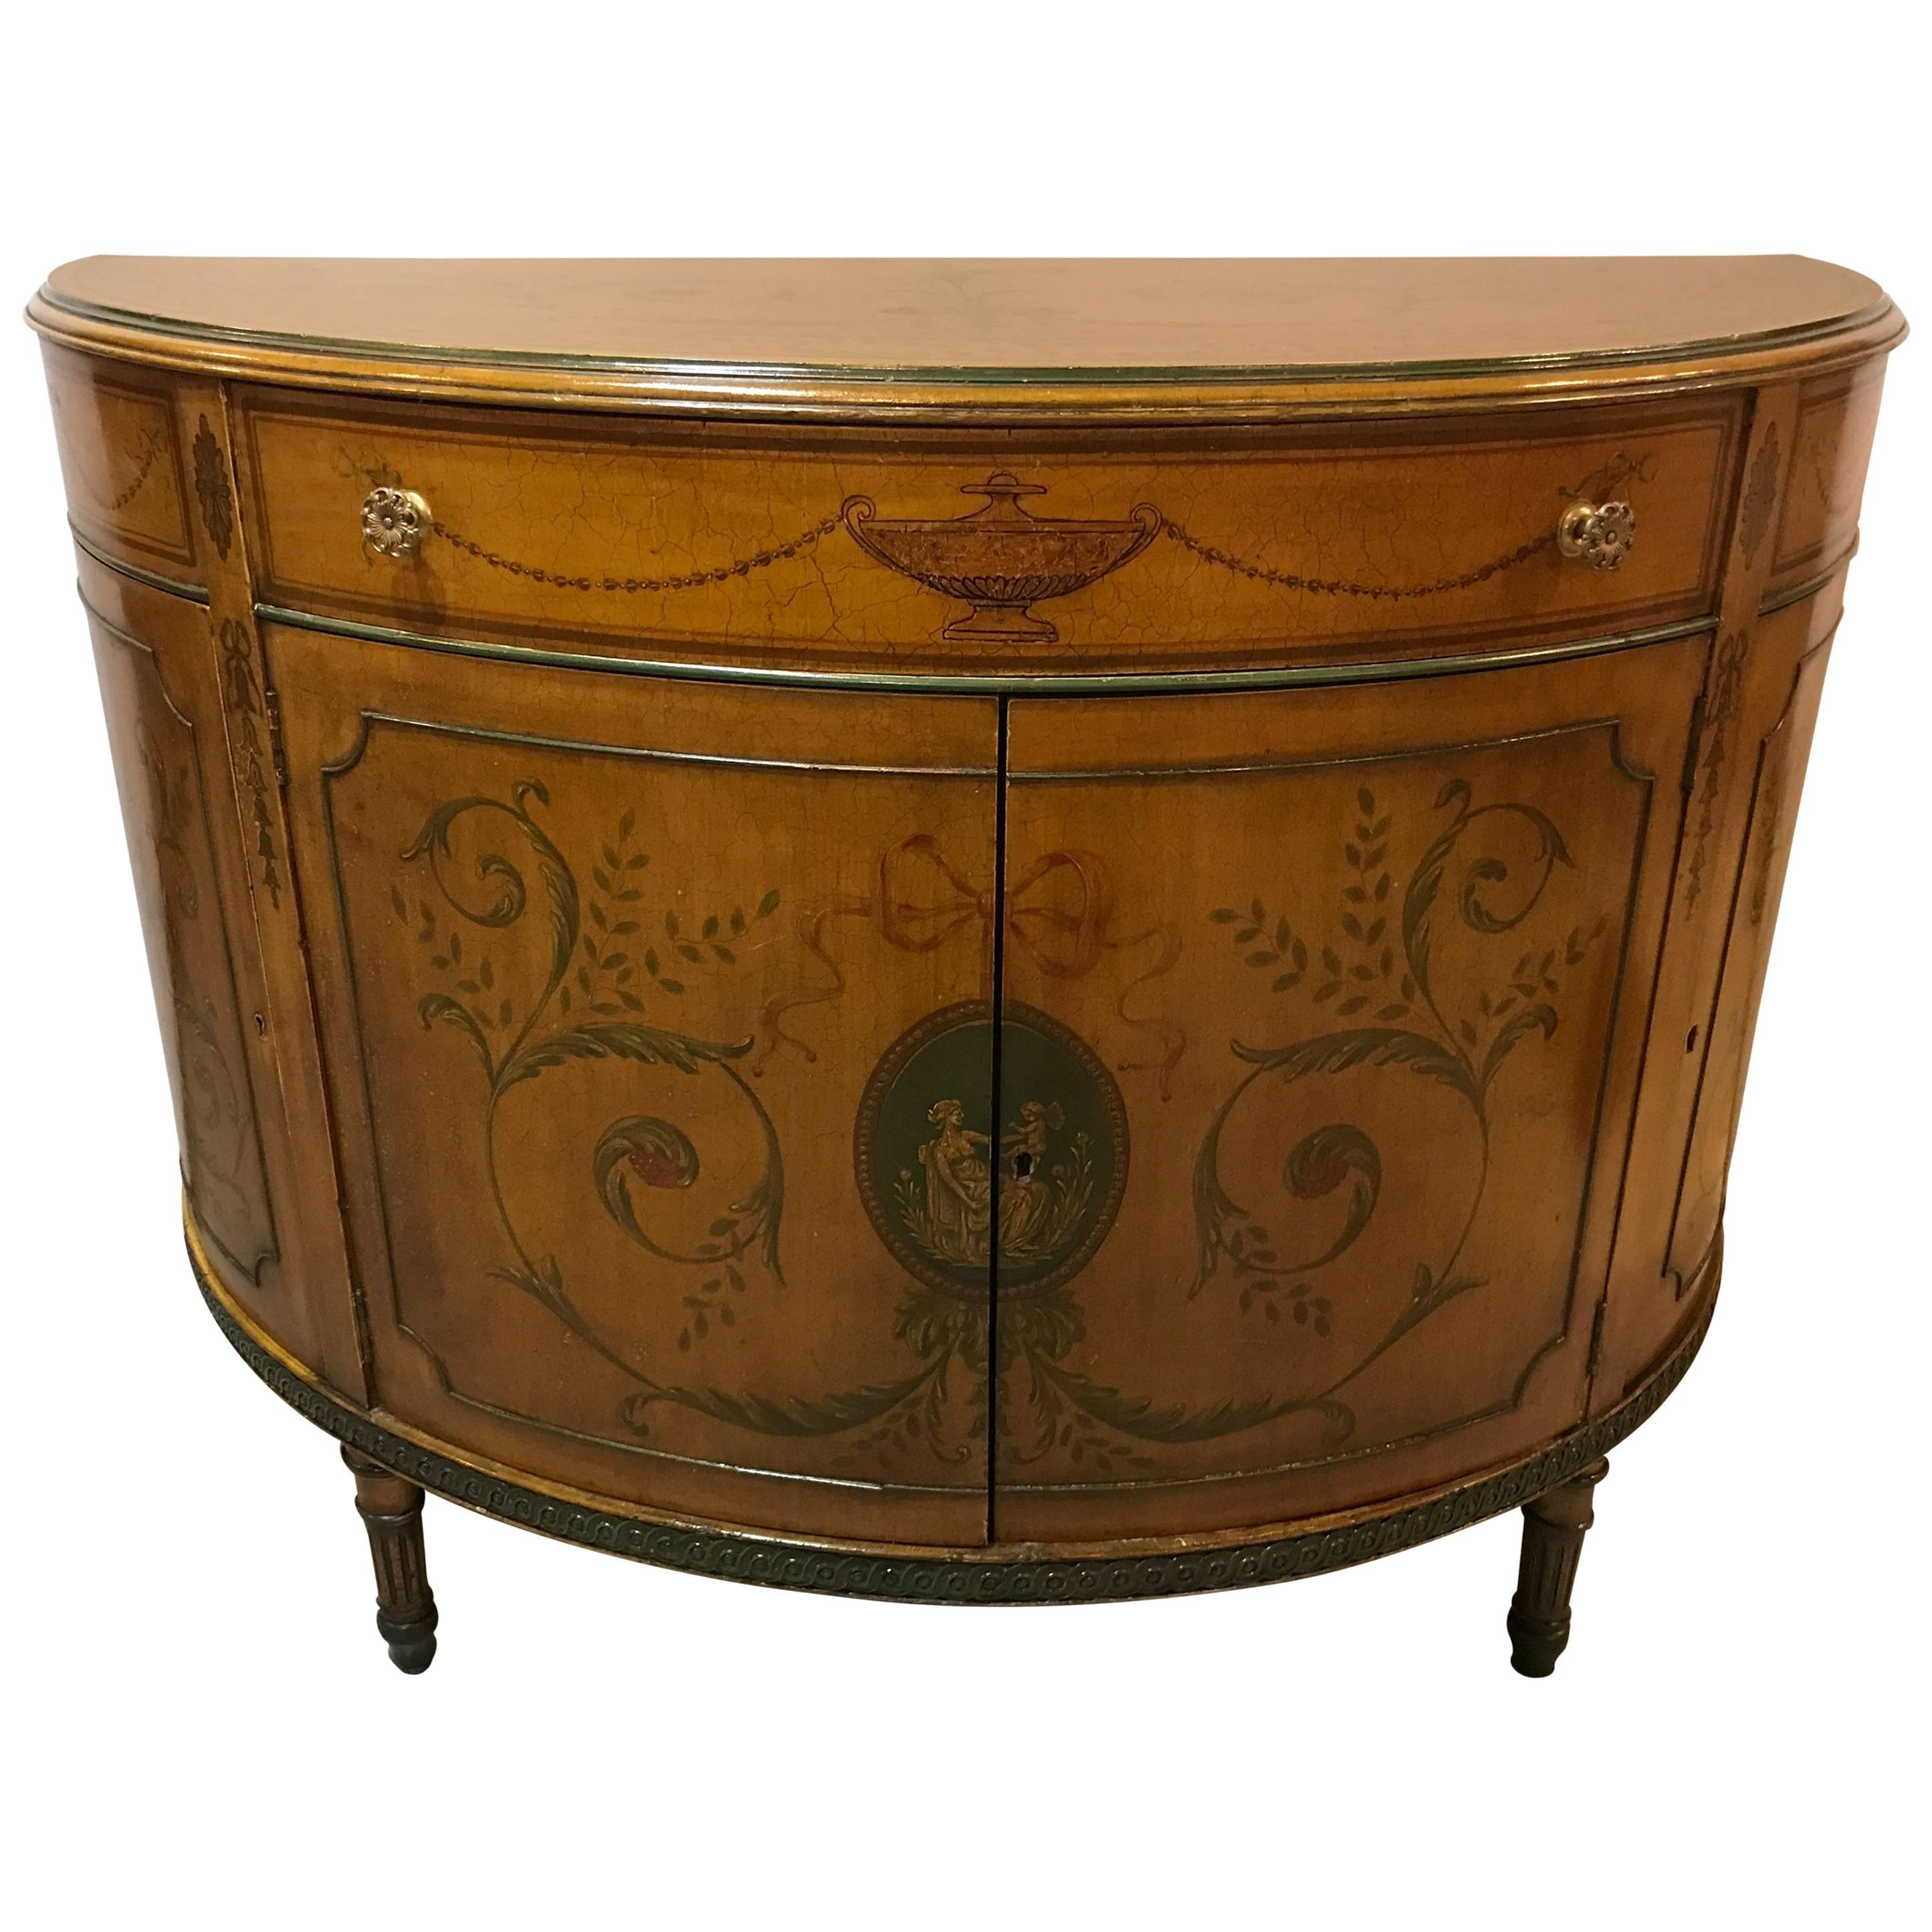 Adams Style Paint Decorated Demilune Commode or Chest with Interior Drawers